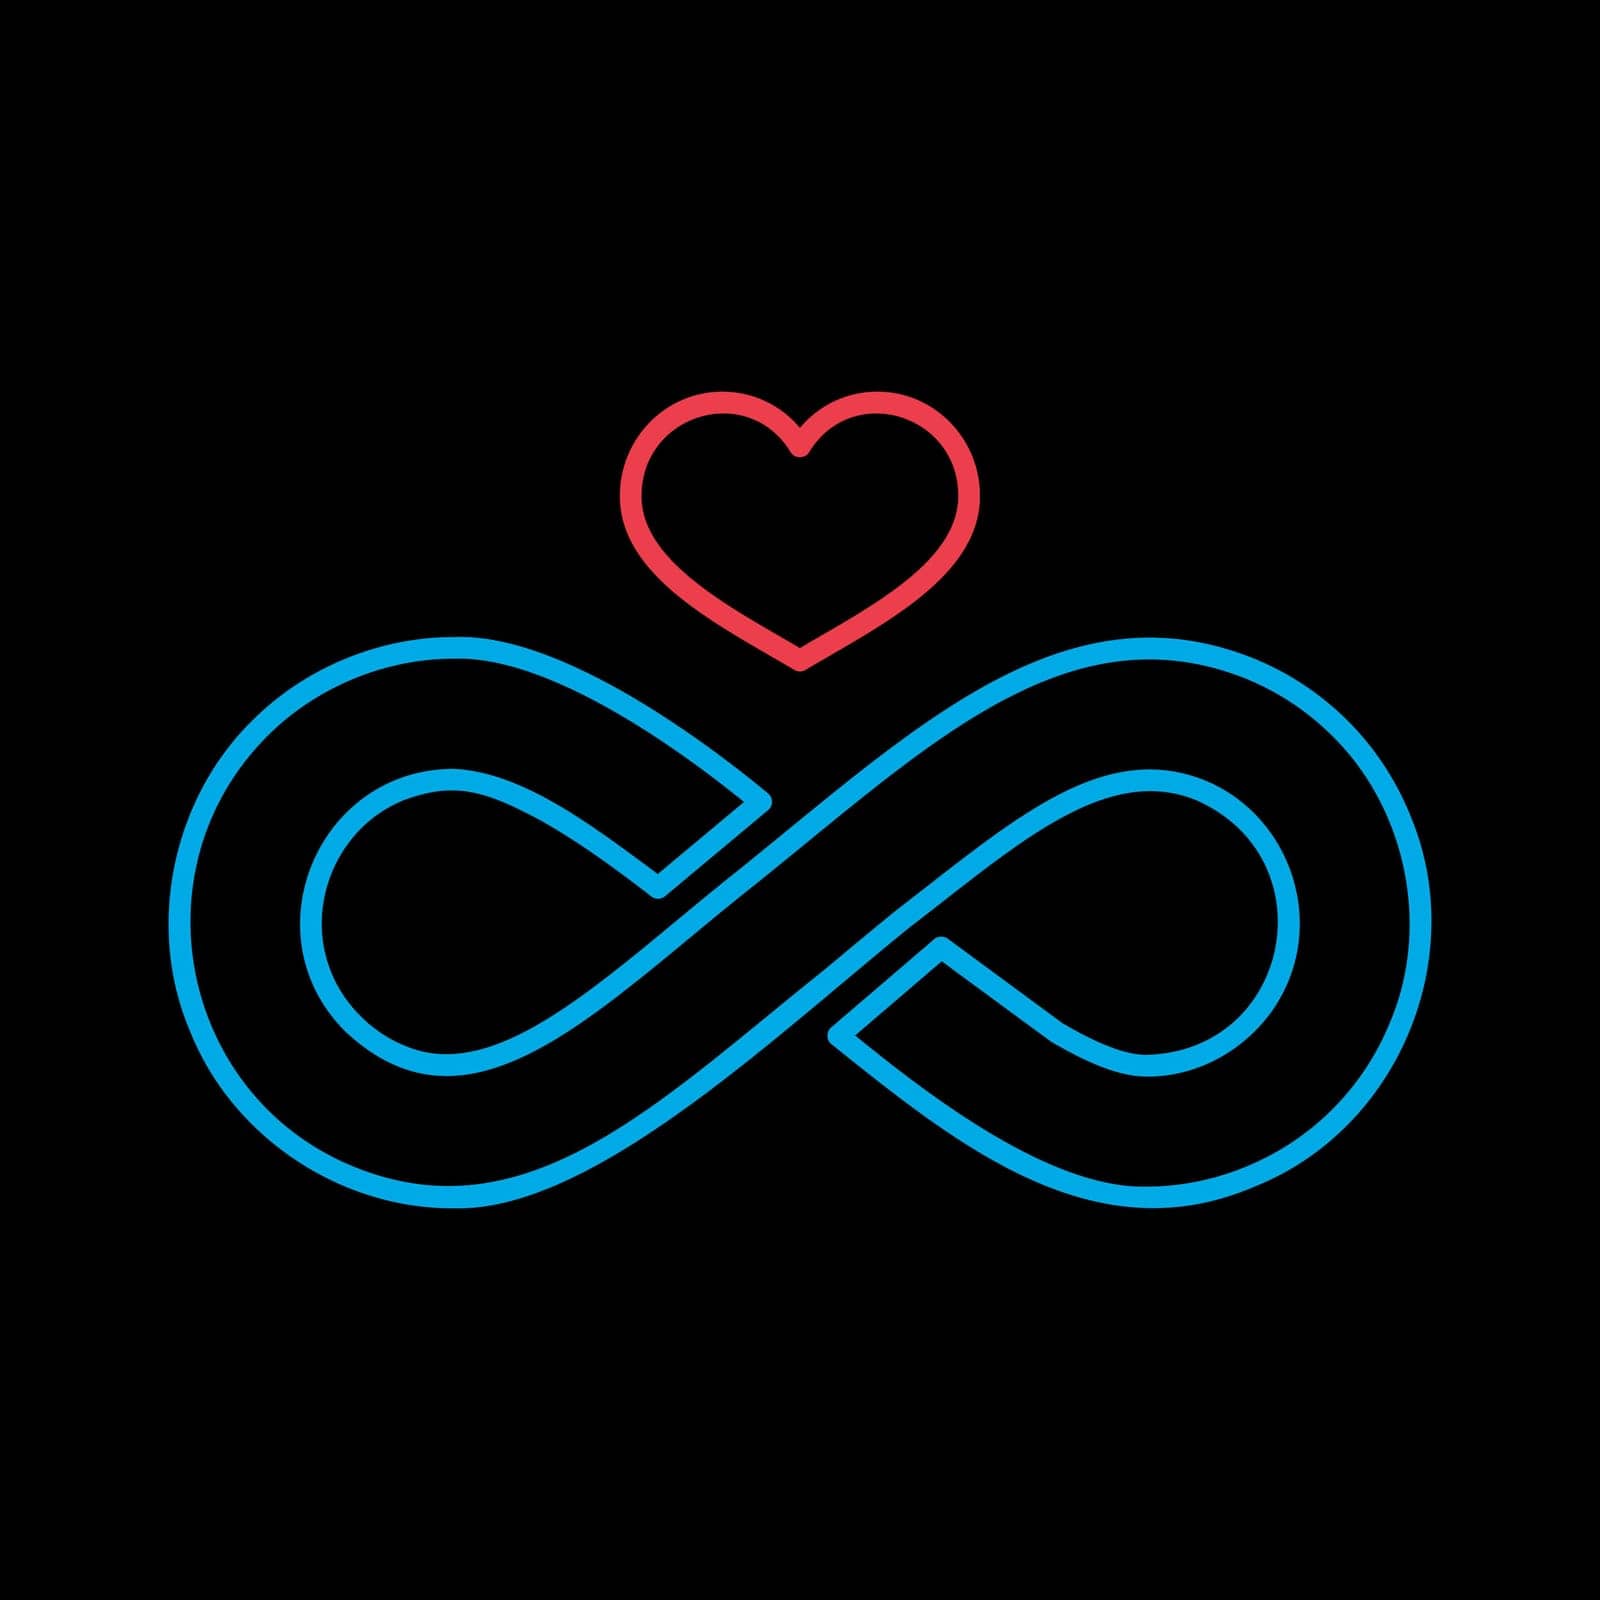 Infinity sign and heart symbol of eternal love isolated on black background icon. Vector illustration, romance elements. Sticker, patch, badge, card for marriage, valentine